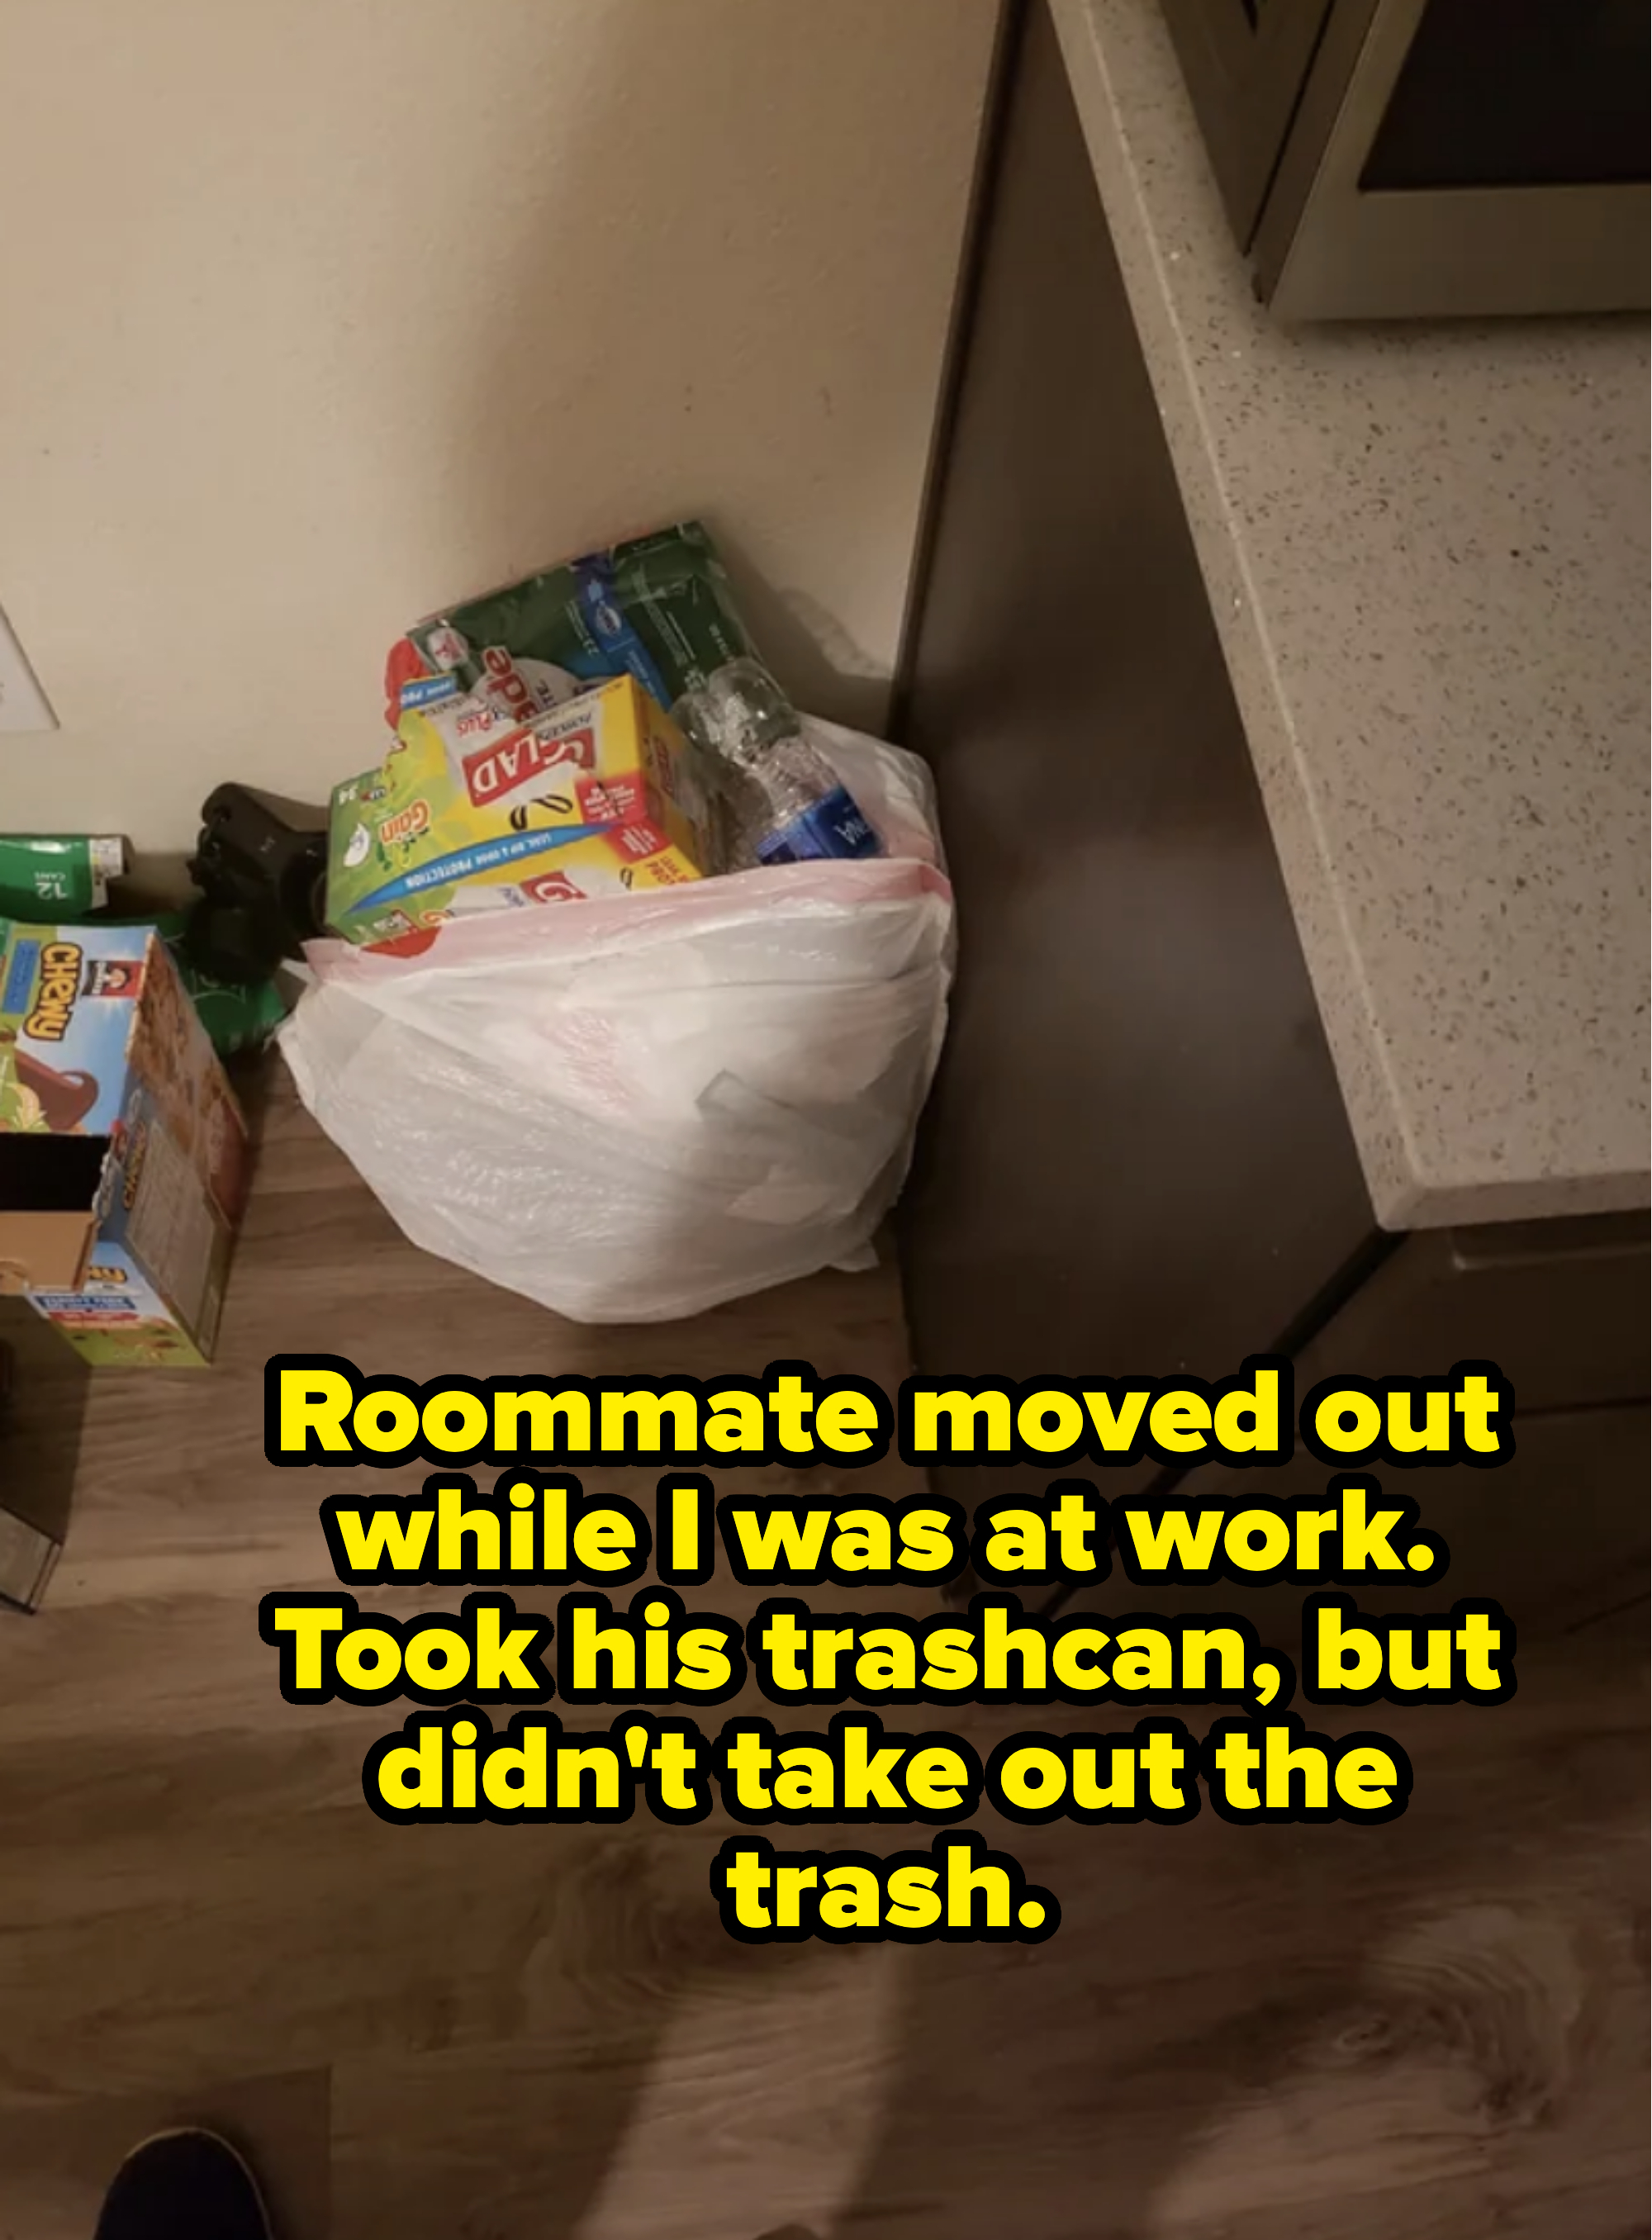 roommate moved out and took his trashcan but didnt take out the trash